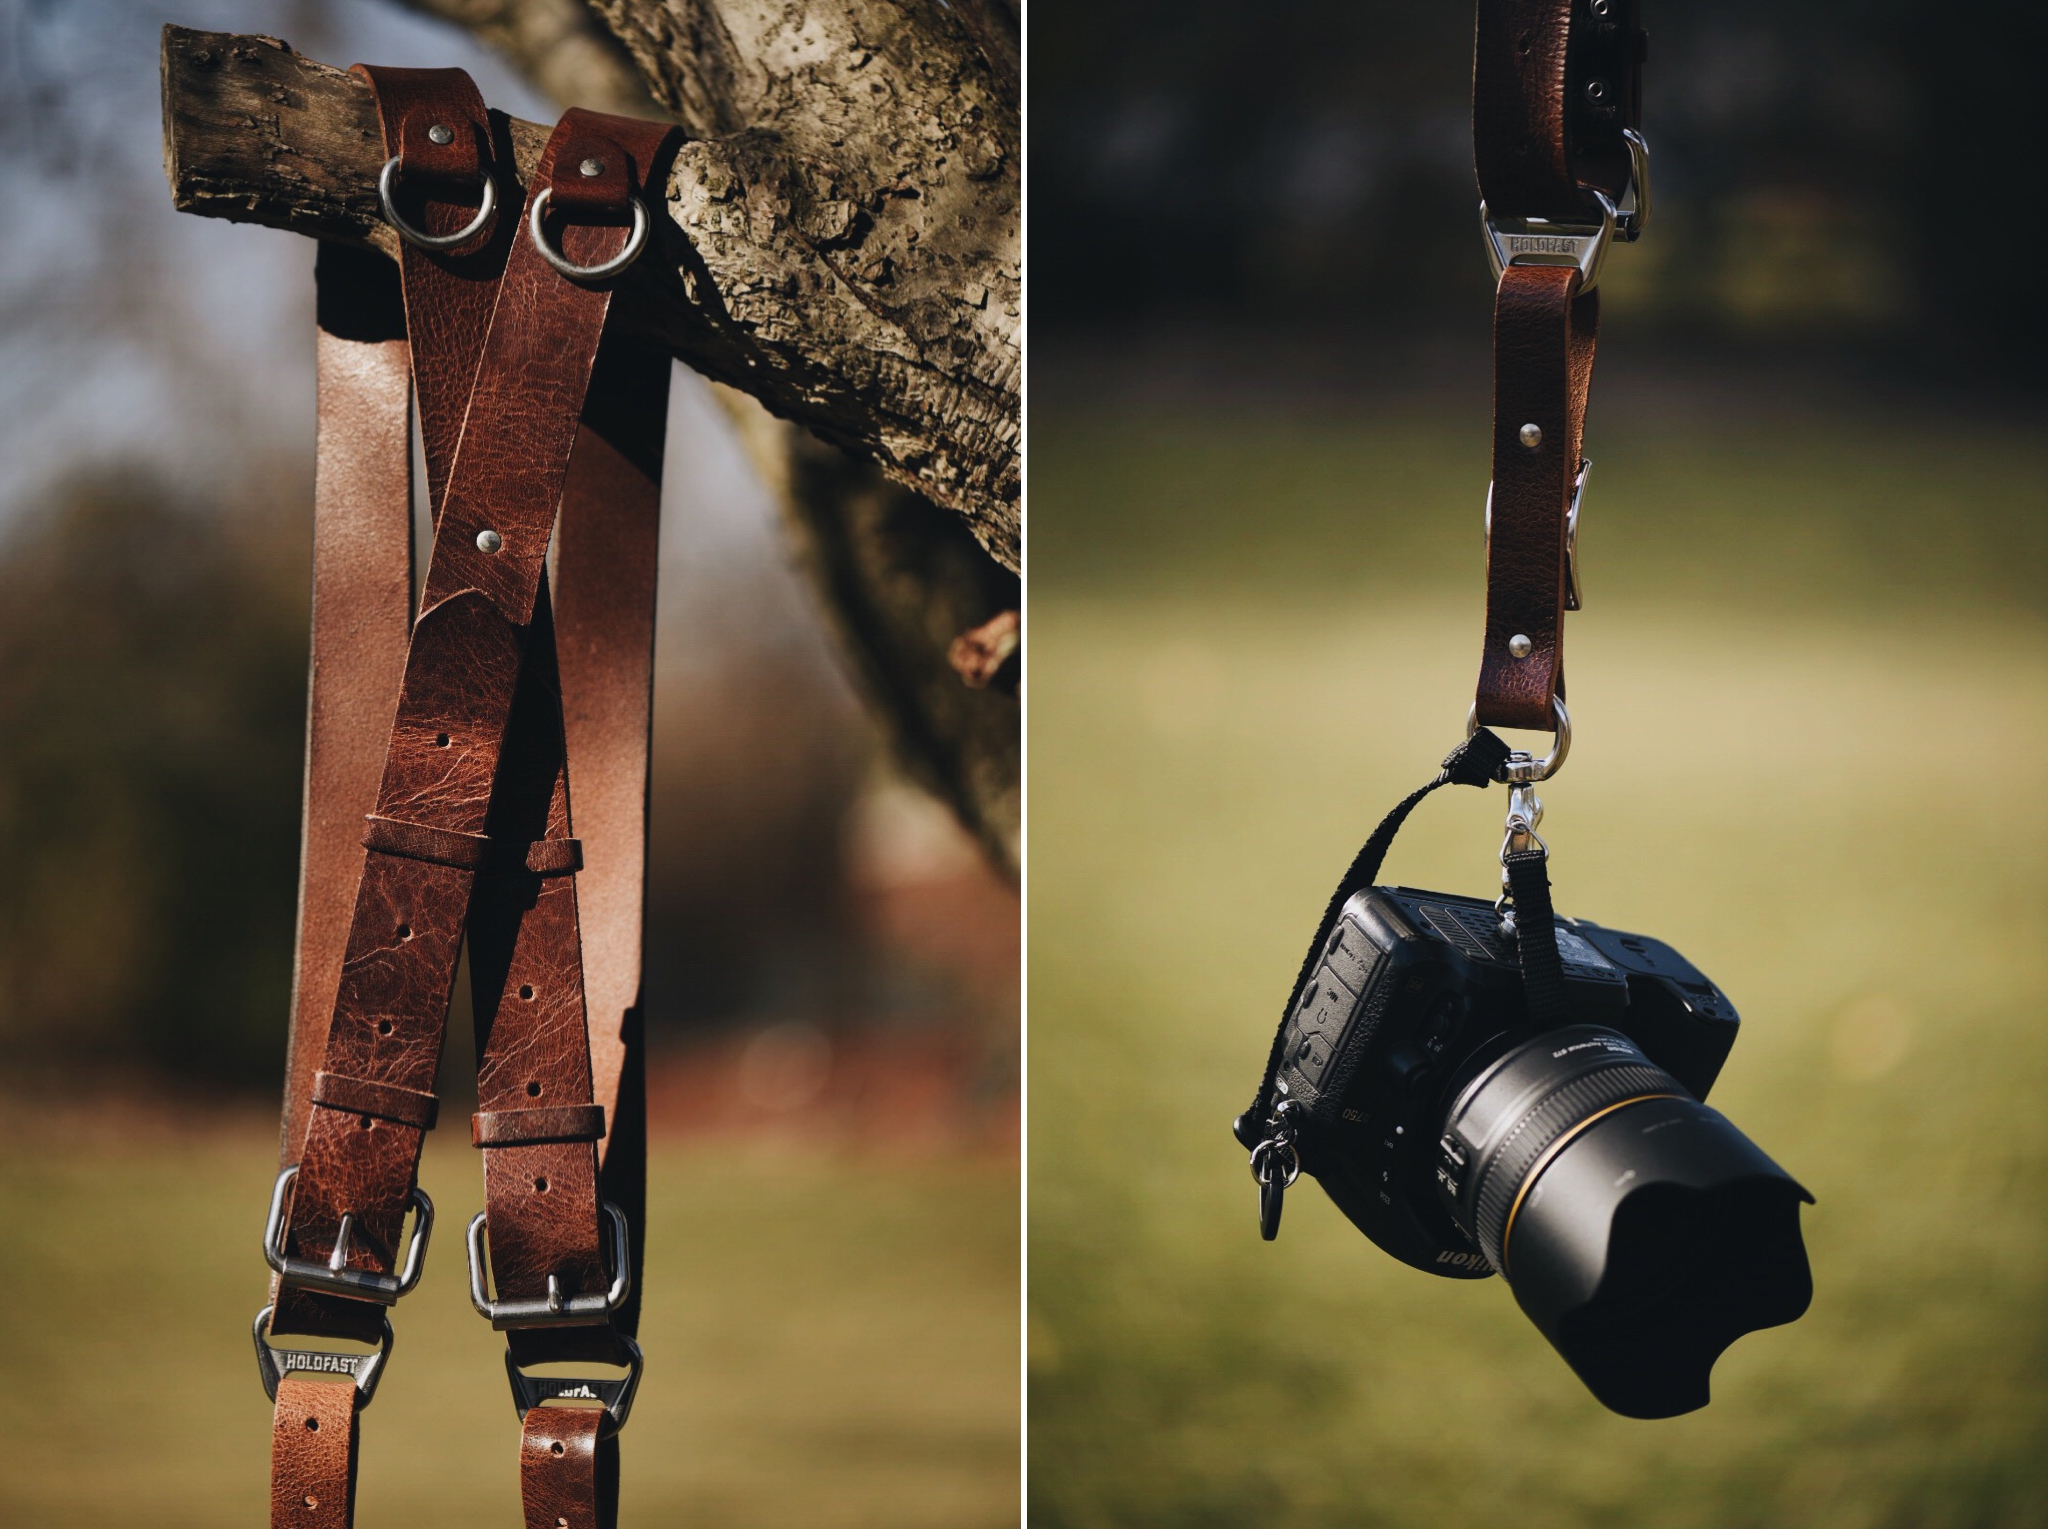  As a destination wedding photographer, I carry two cameras with me throughout a wedding day. A dual camera strap system is crucial for me, so I can remain hands-free while I assist my bride and set up shots. Unlike many other straps on the market, the Holdfast MoneyMaker gives me the assurance that as I move and work throughout a wedding, my straps won